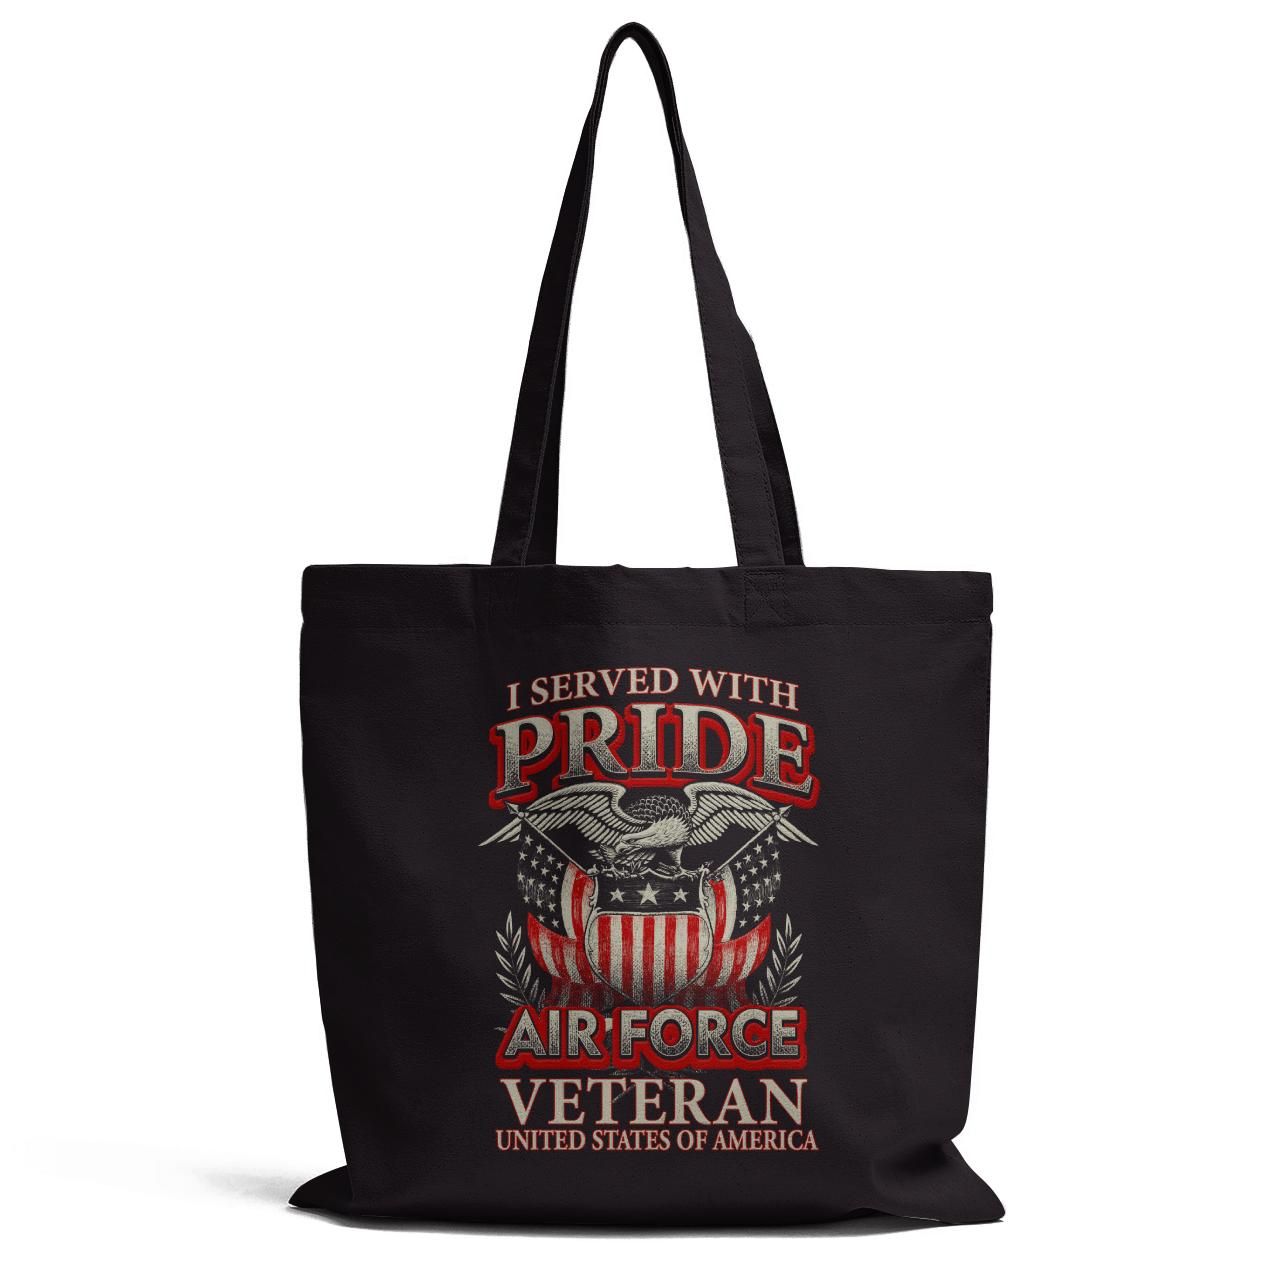 I Served With Pride Air Force Tote Bag